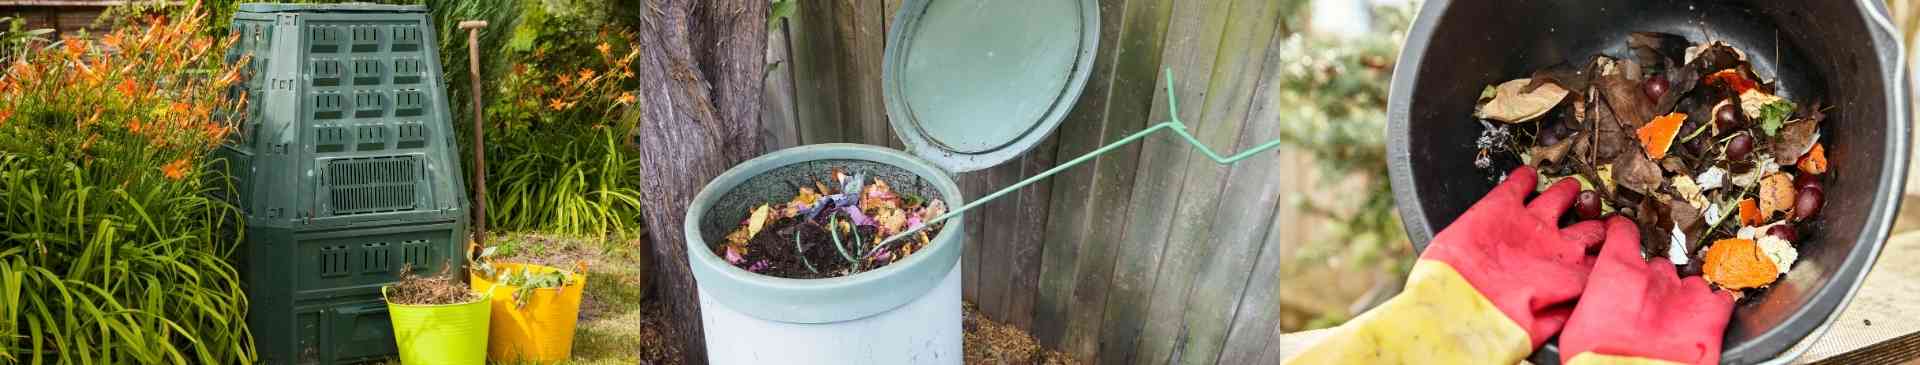 Composting in a Small Garden